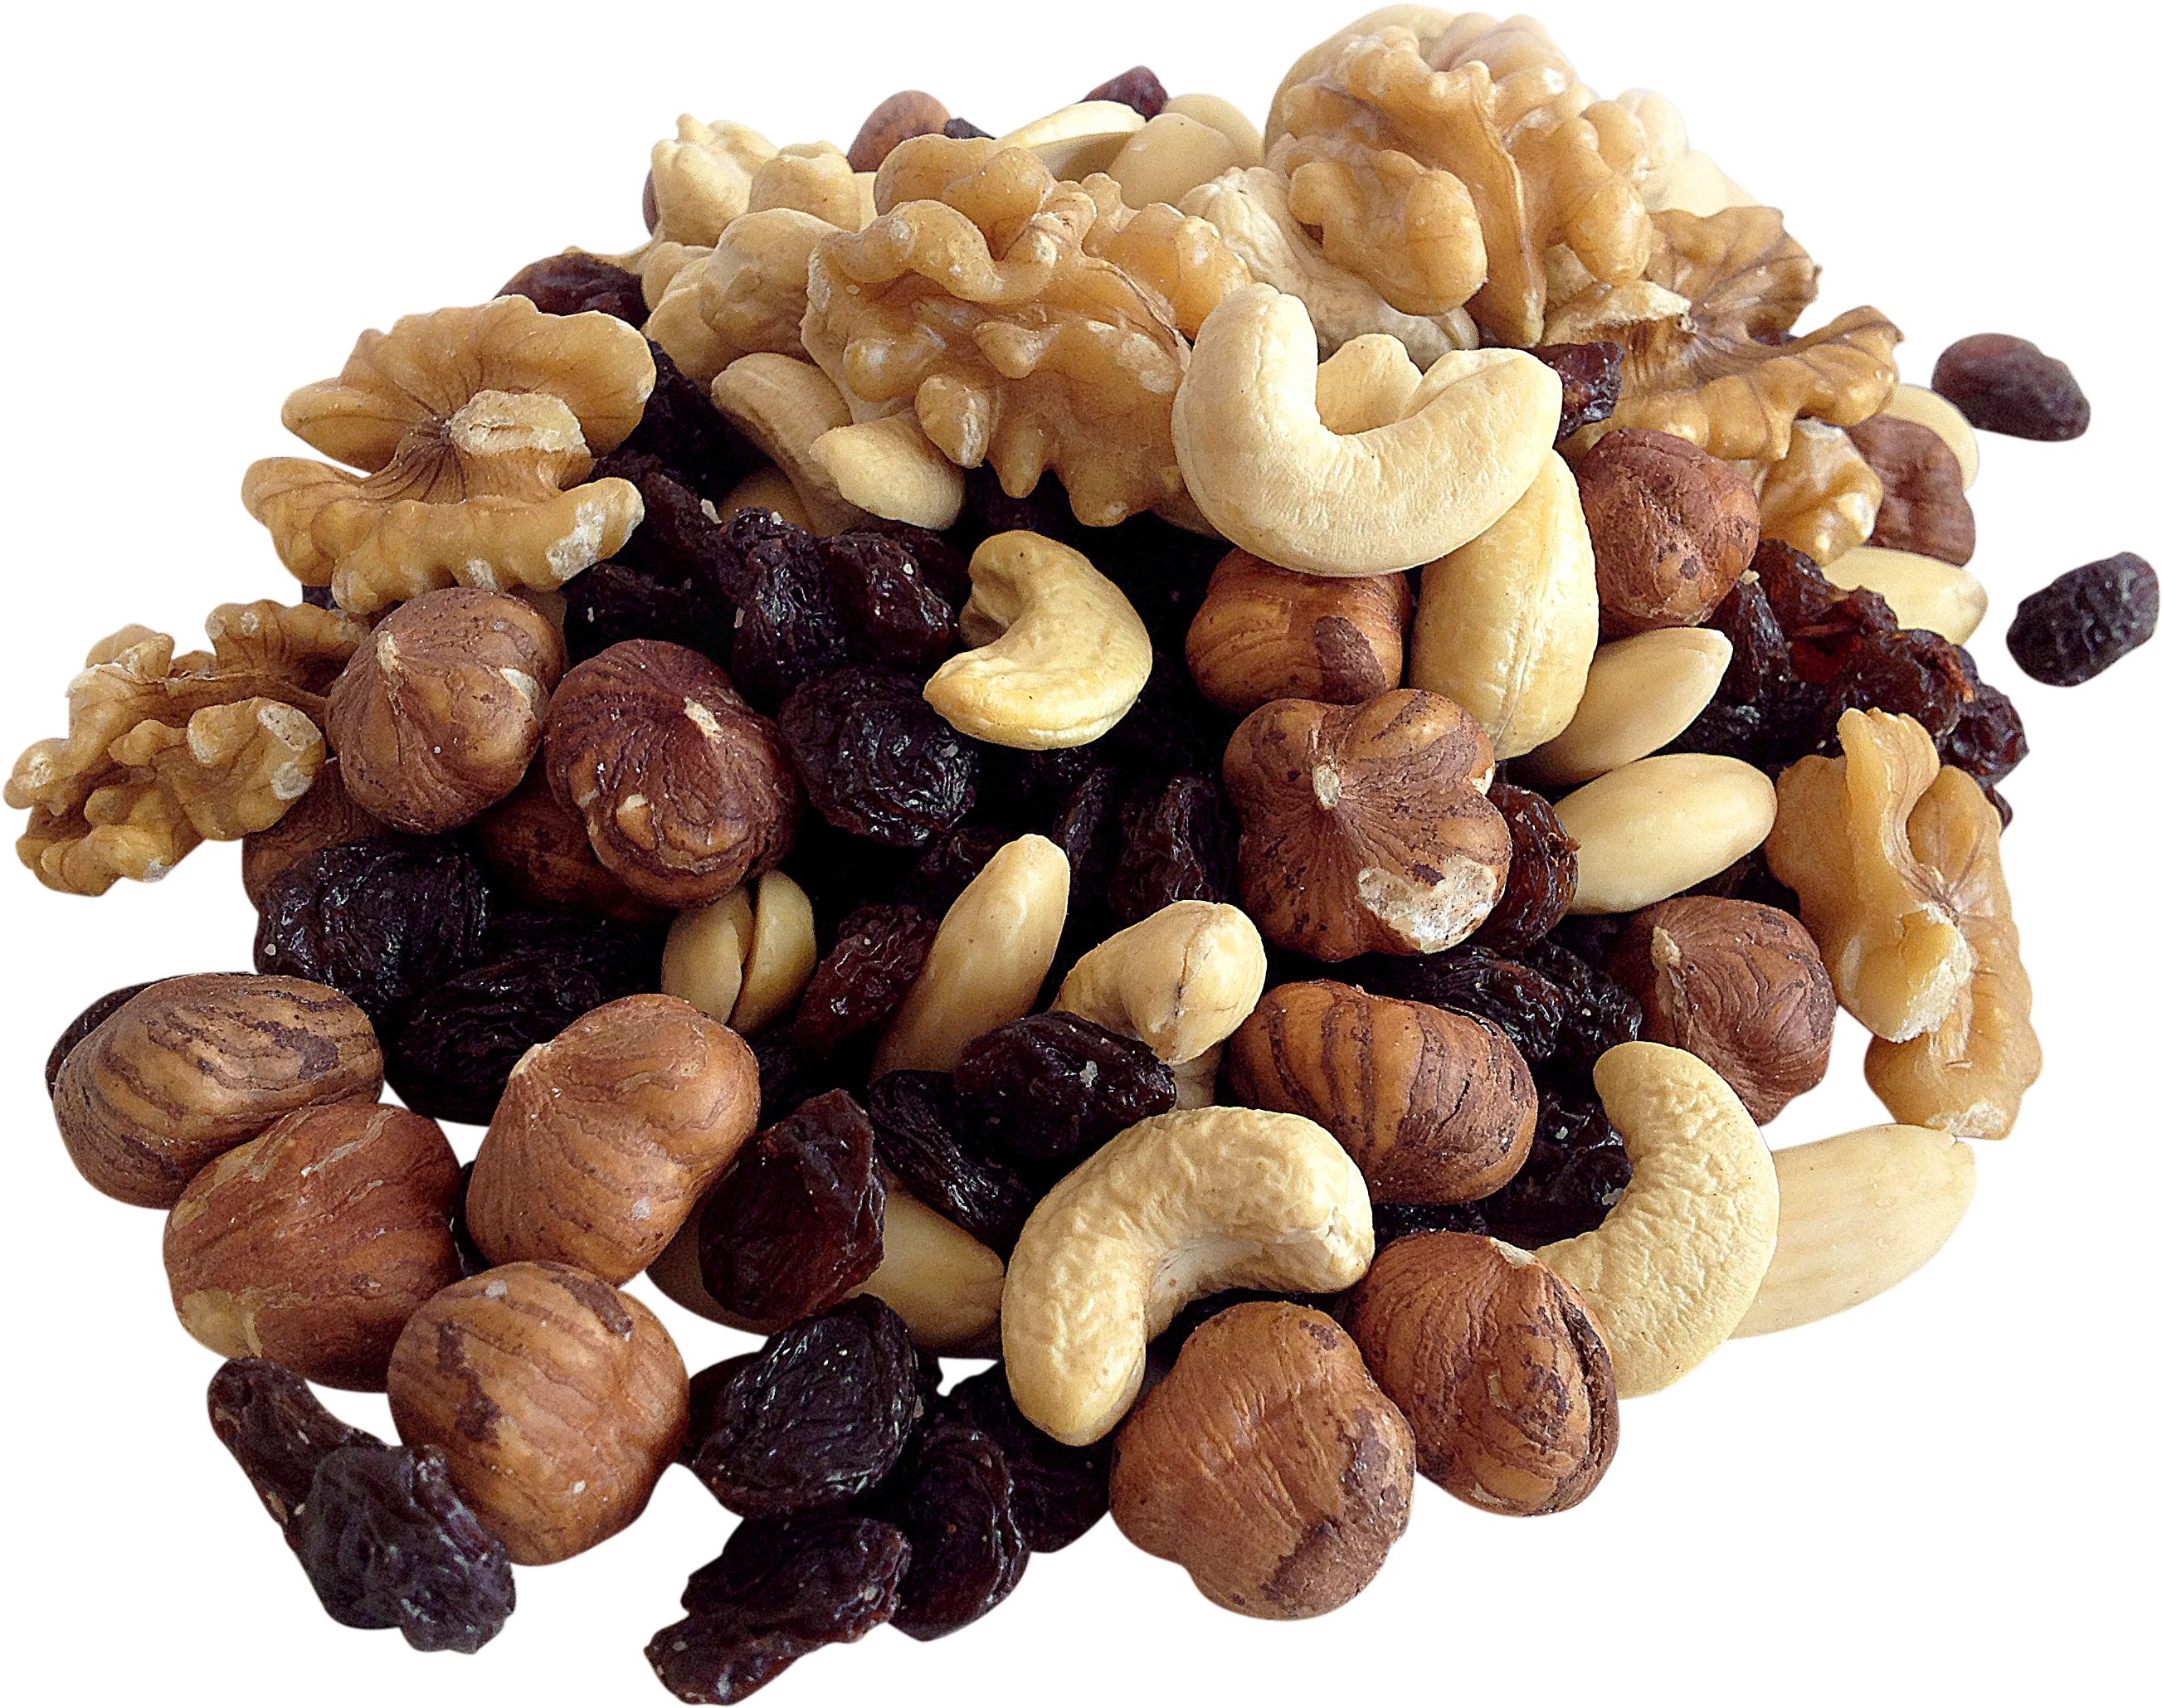 Dry Fruits And Mixed Nuts